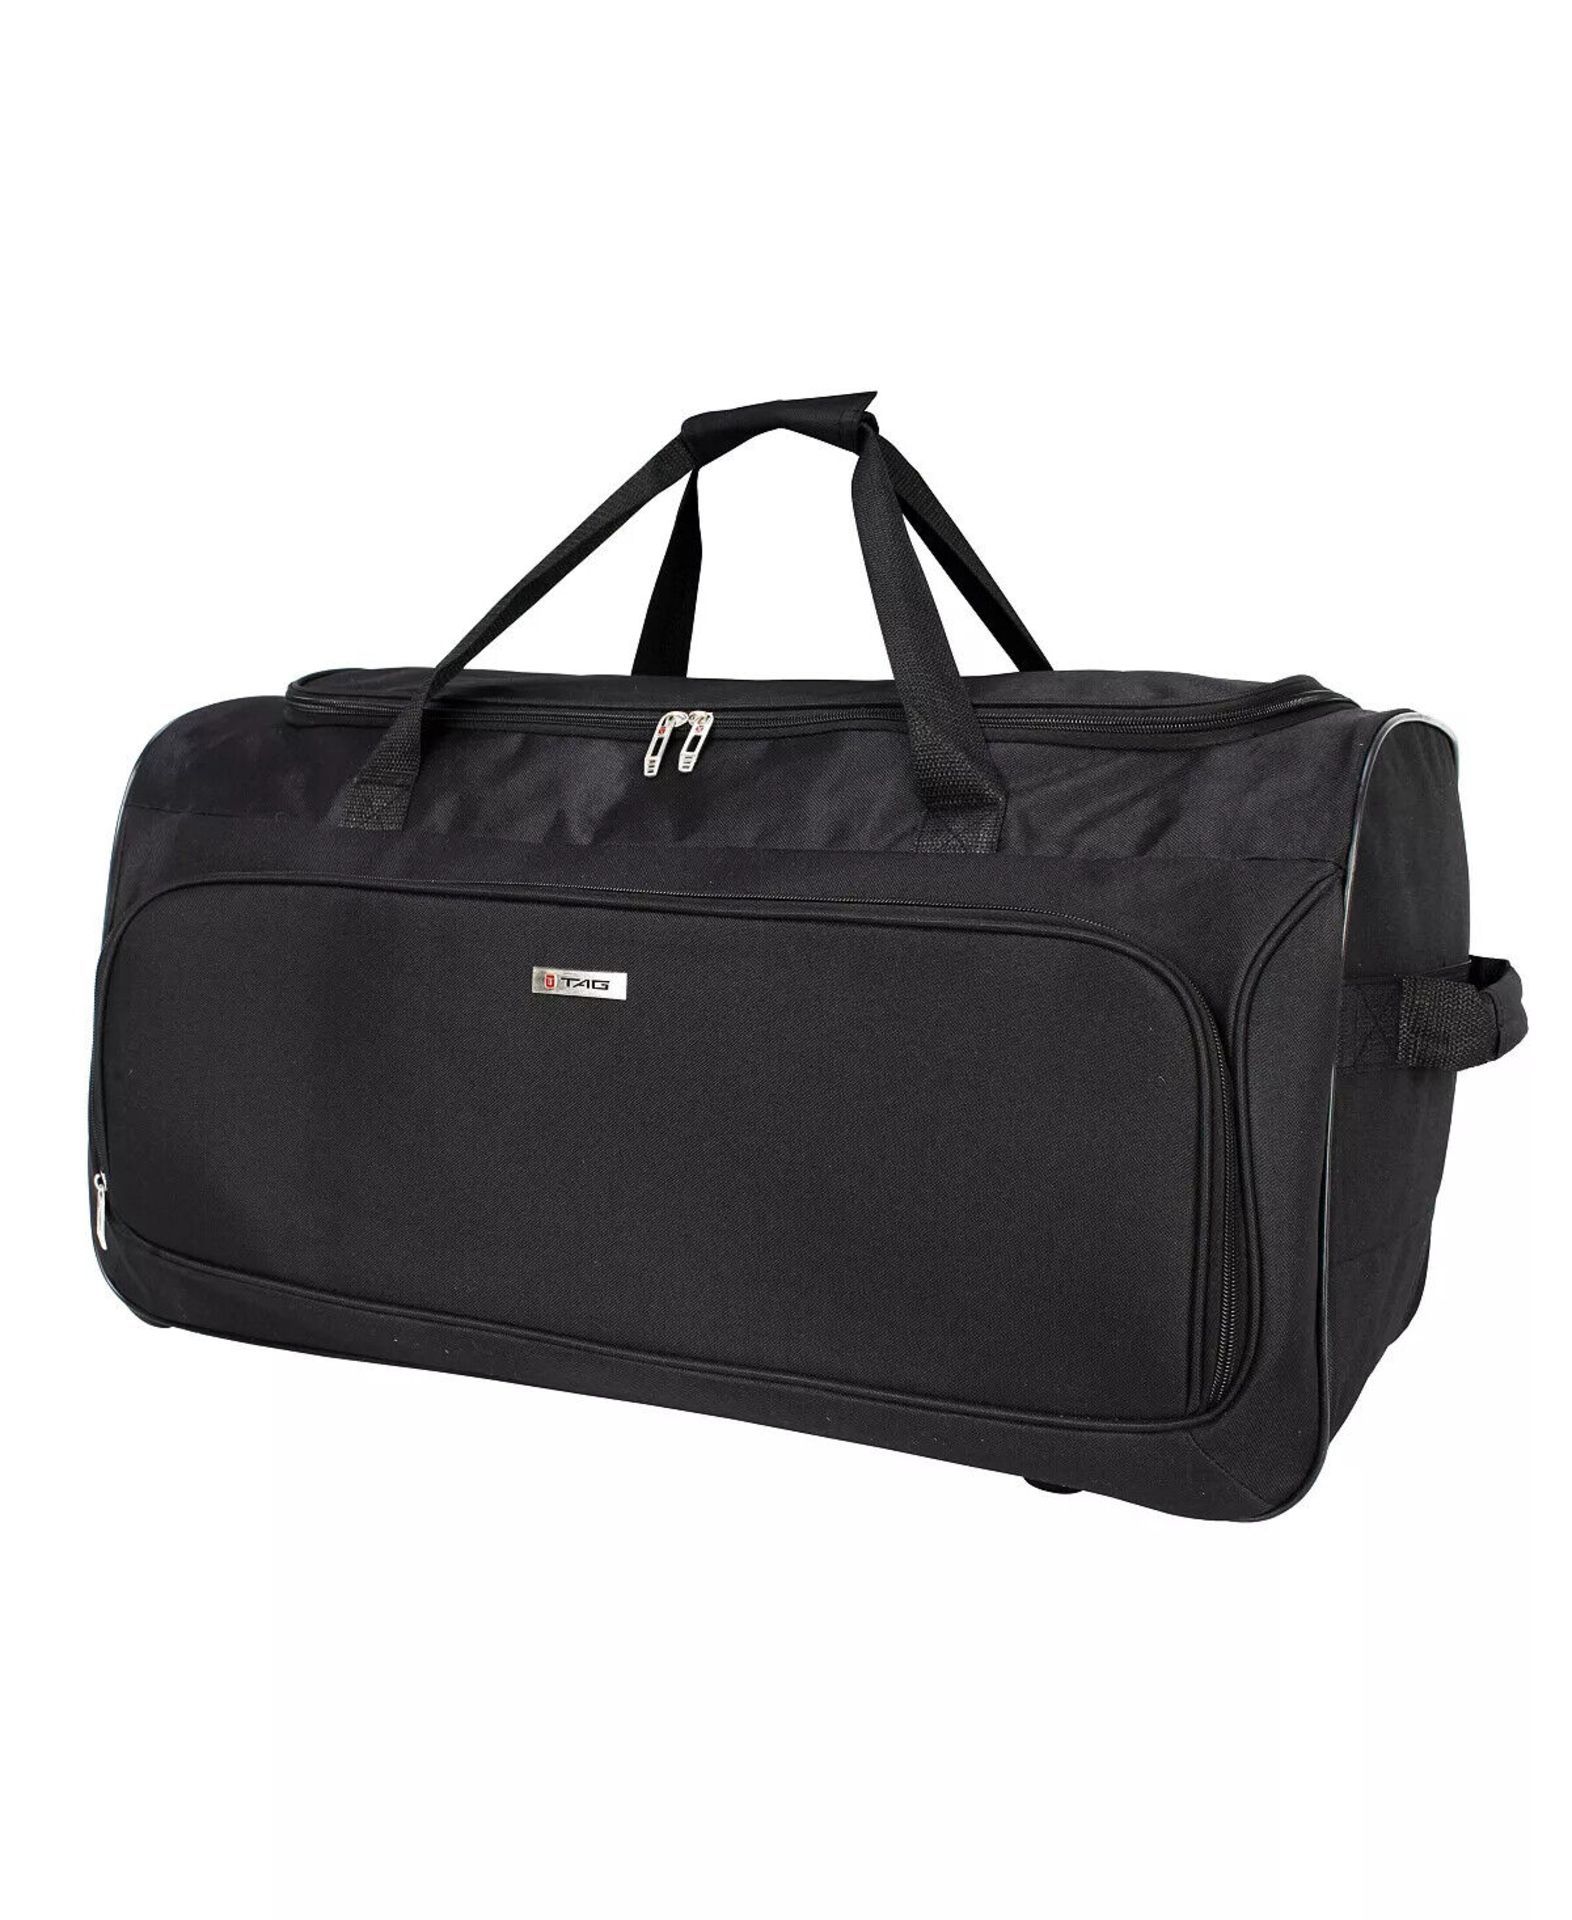 New Set OF TAG Ridgefield Black 5 Piece Softside Luggage Set. RRP $300 R5.7. This classic set from - Image 4 of 5